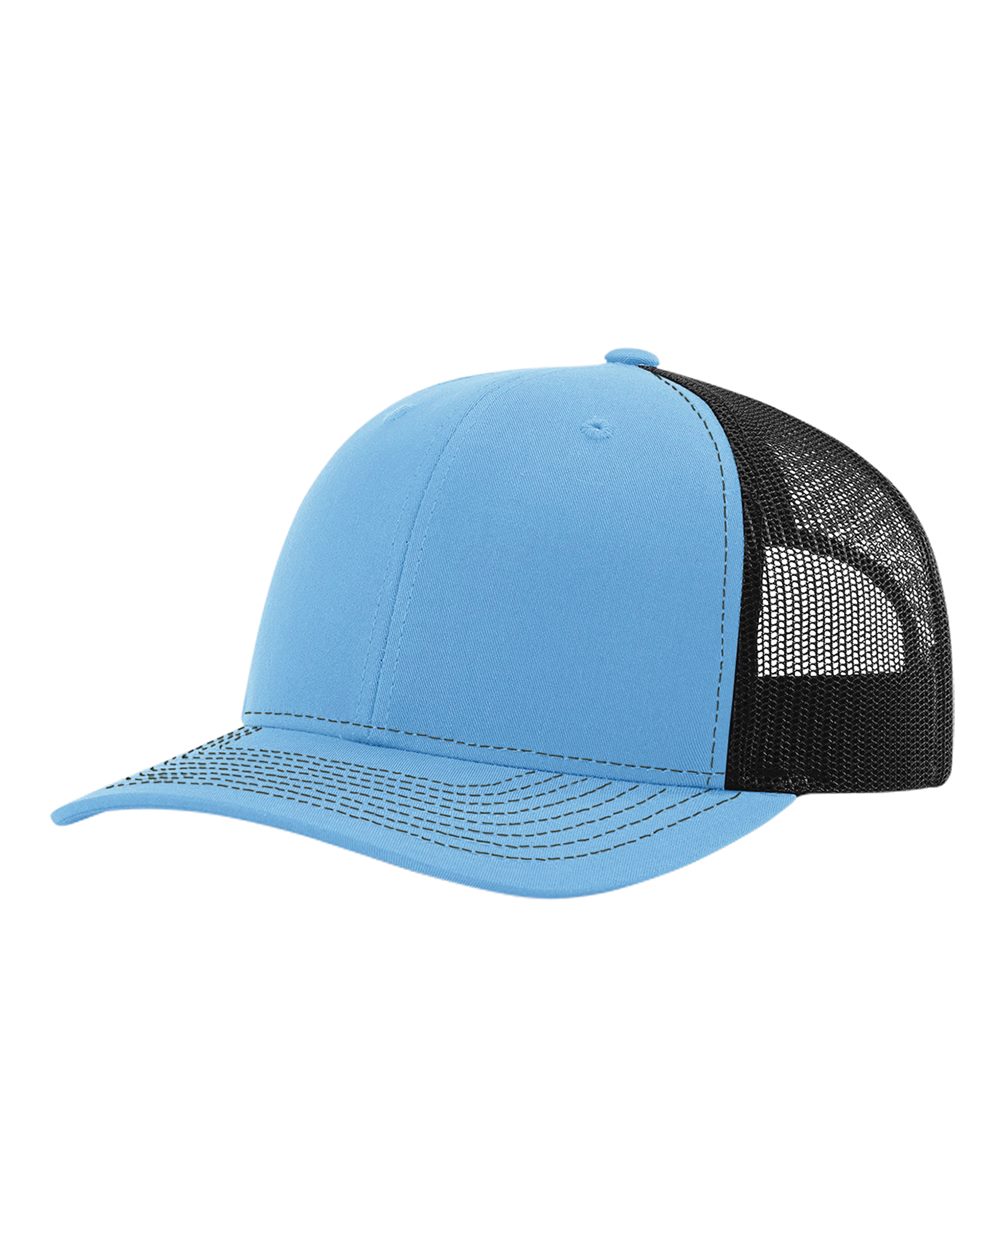 click to view Columbia Blue/ Black